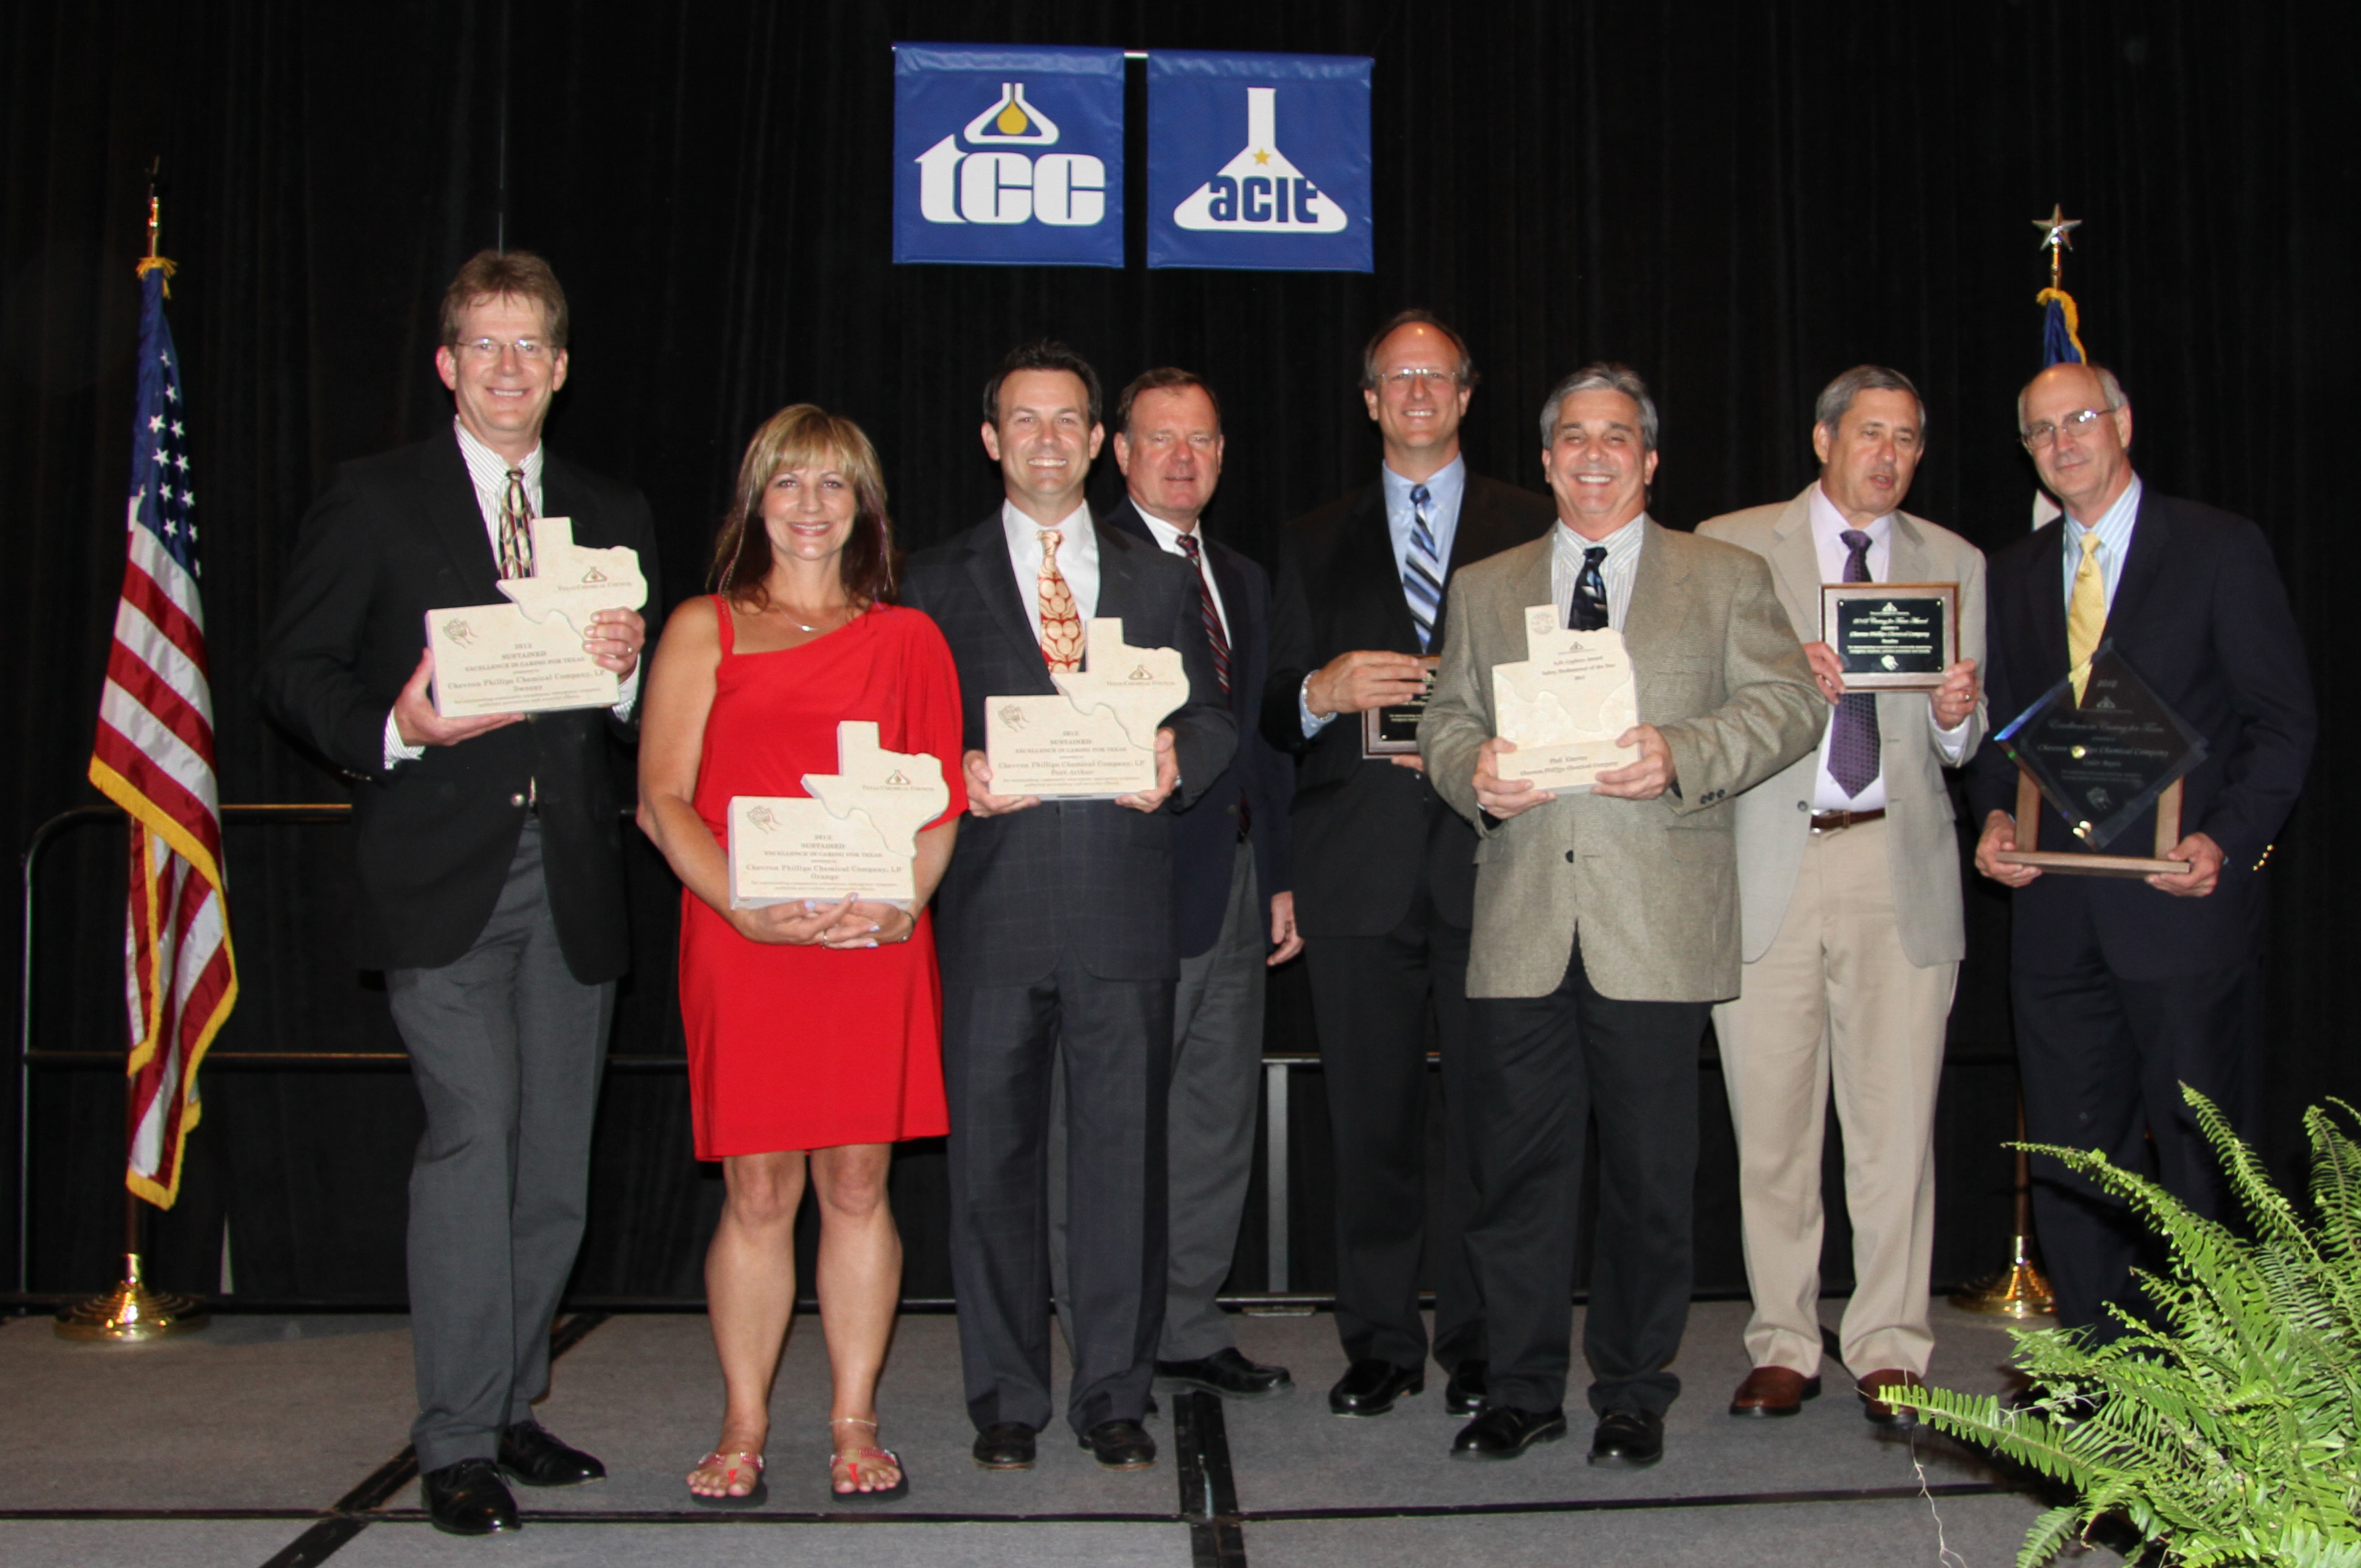 Chevron Phillips Chemical wins Texas Chemical Council (TCC) safety awards.